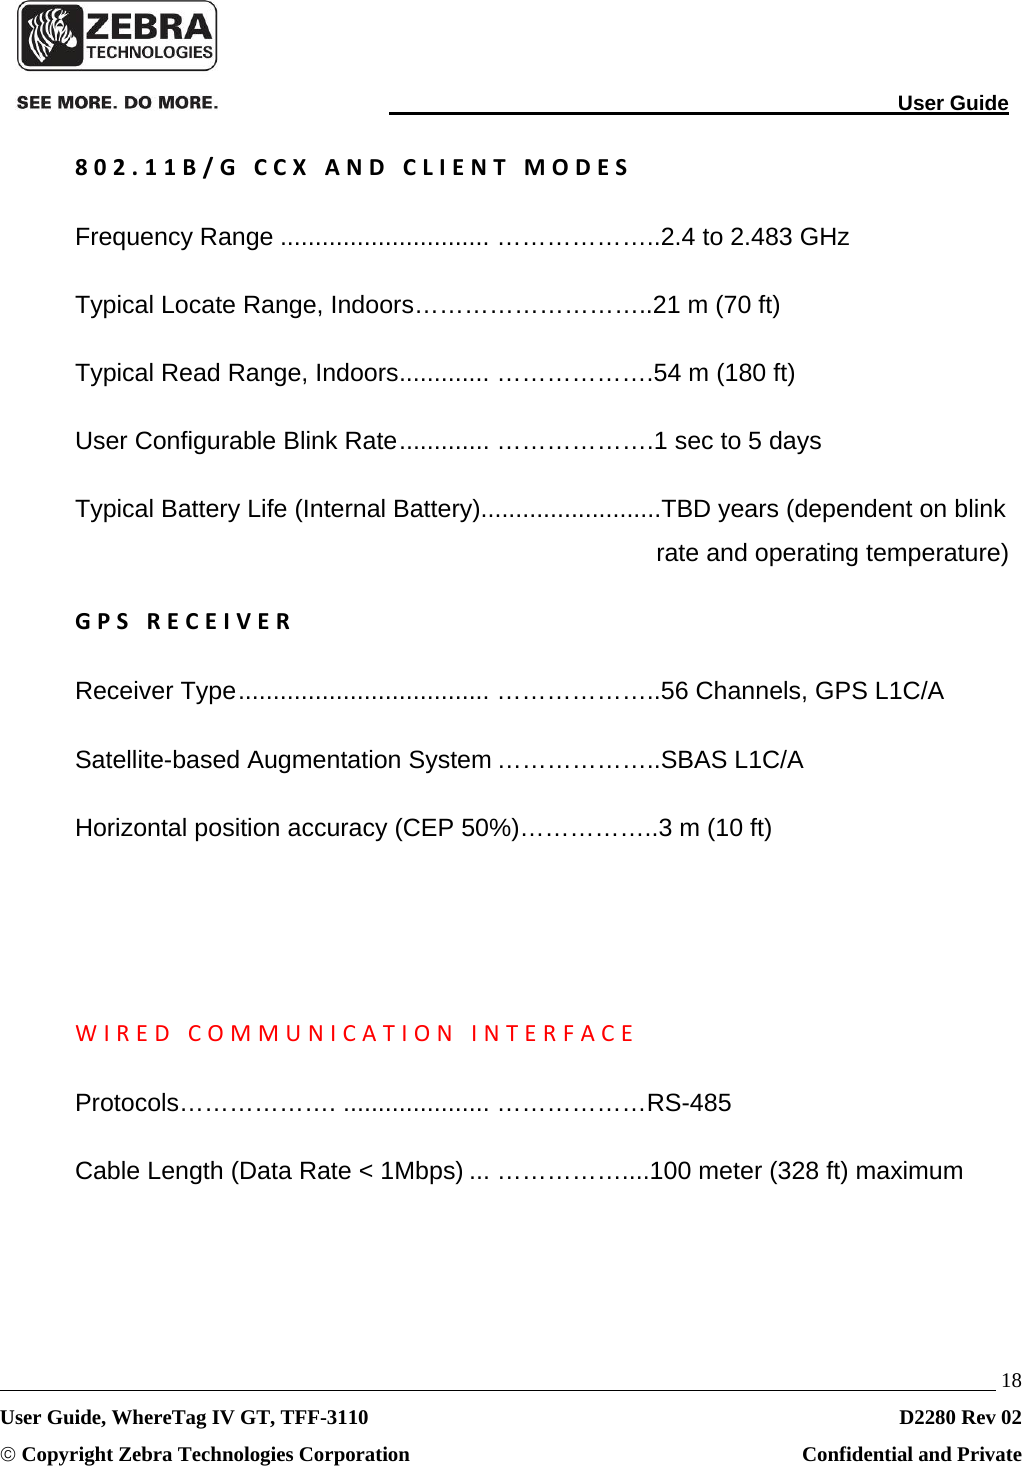                                                                                                                                User Guide   18 User Guide, WhereTag IV GT, TFF-3110  D2280 Rev 02 © Copyright Zebra Technologies Corporation  Confidential and Private 802.11B/GCCXANDCLIENTMODESFrequency Range .............................. ………………..2.4 to 2.483 GHz Typical Locate Range, Indoors………………………..21 m (70 ft) Typical Read Range, Indoors ............. ……………….54 m (180 ft) User Configurable Blink Rate .............  ……………….1  sec to 5 days Typical Battery Life (Internal Battery)..........................TBD years (dependent on blink rate and operating temperature) GPSRECEIVERReceiver Type .................................... ………………..56 Channels, GPS L1C/A Satellite-based Augmentation System ………………..SBAS L1C/A Horizontal position accuracy (CEP 50%)……………..3 m (10 ft)   WIREDCOMMUNICATIONINTERFACEProtocols………………. ..................... ………………RS-485 Cable Length (Data Rate &lt; 1Mbps) ... ……………....100 meter (328 ft) maximum   